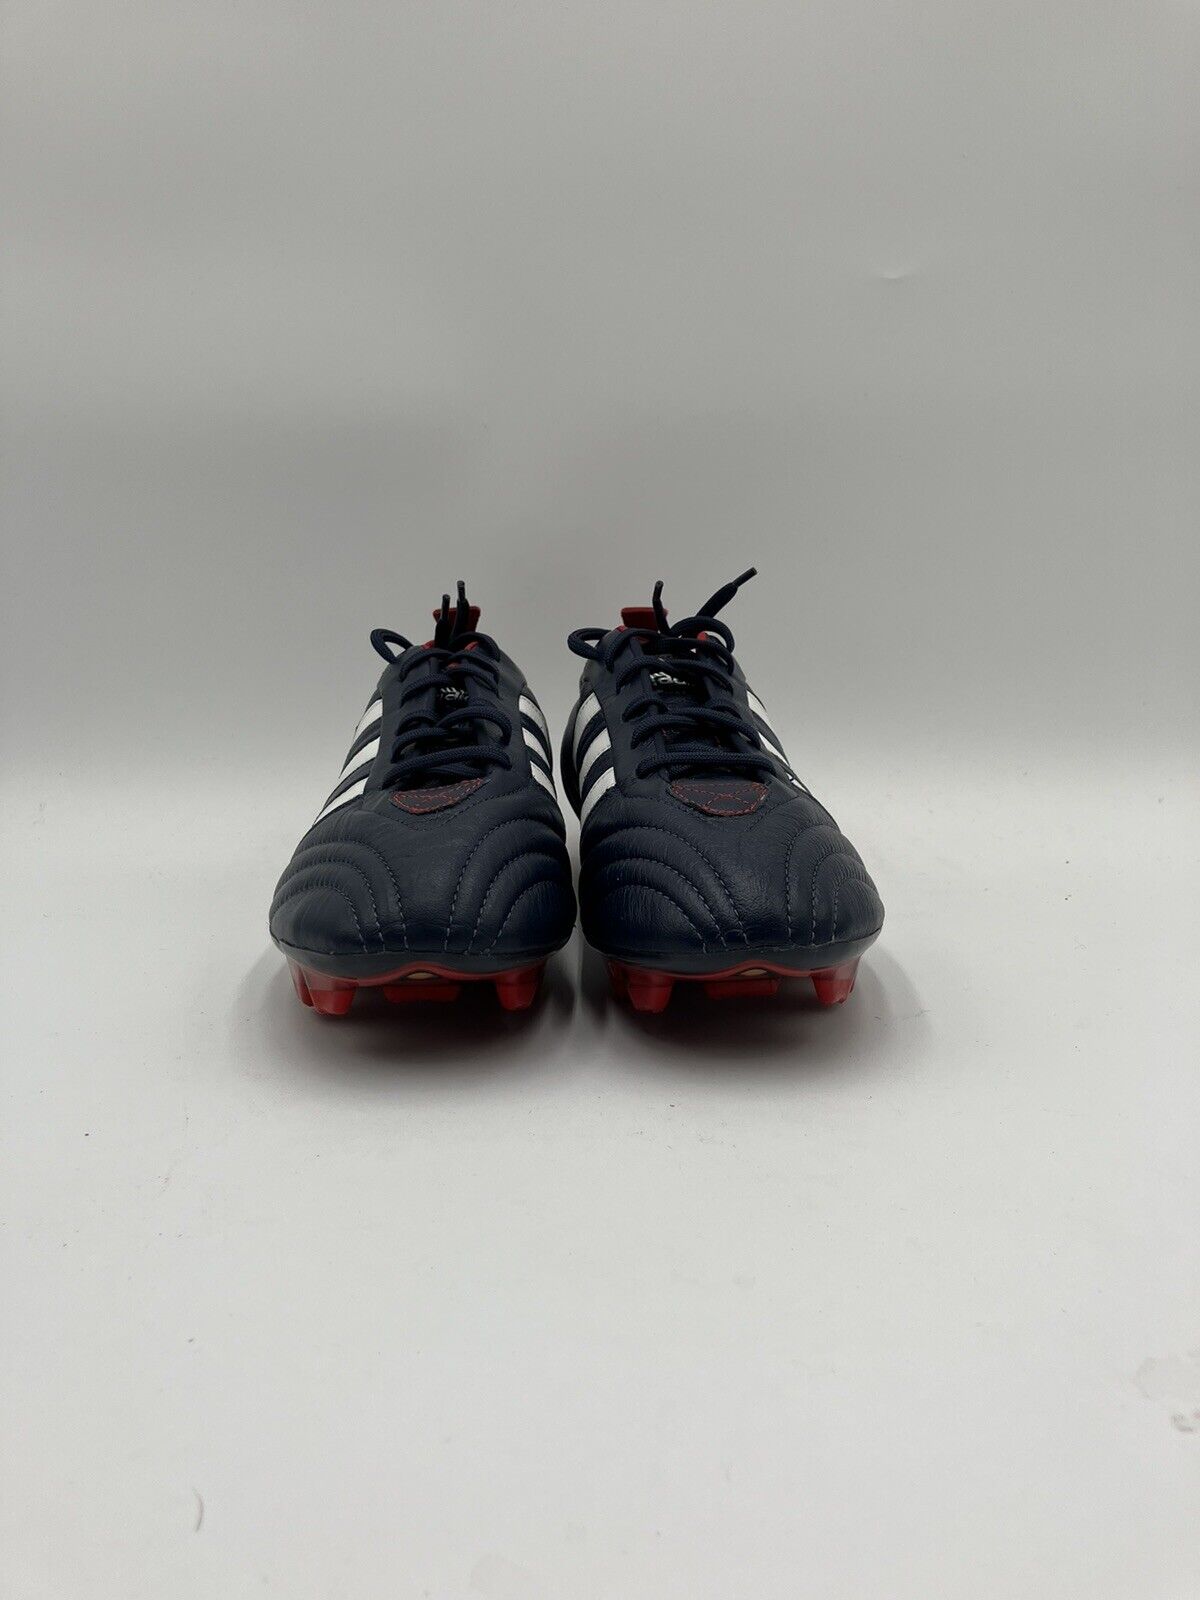 VINTAGE 2008 Adidas AdiPure TRX FG Women's Soccer Cleats Blue Red Size 9 011817